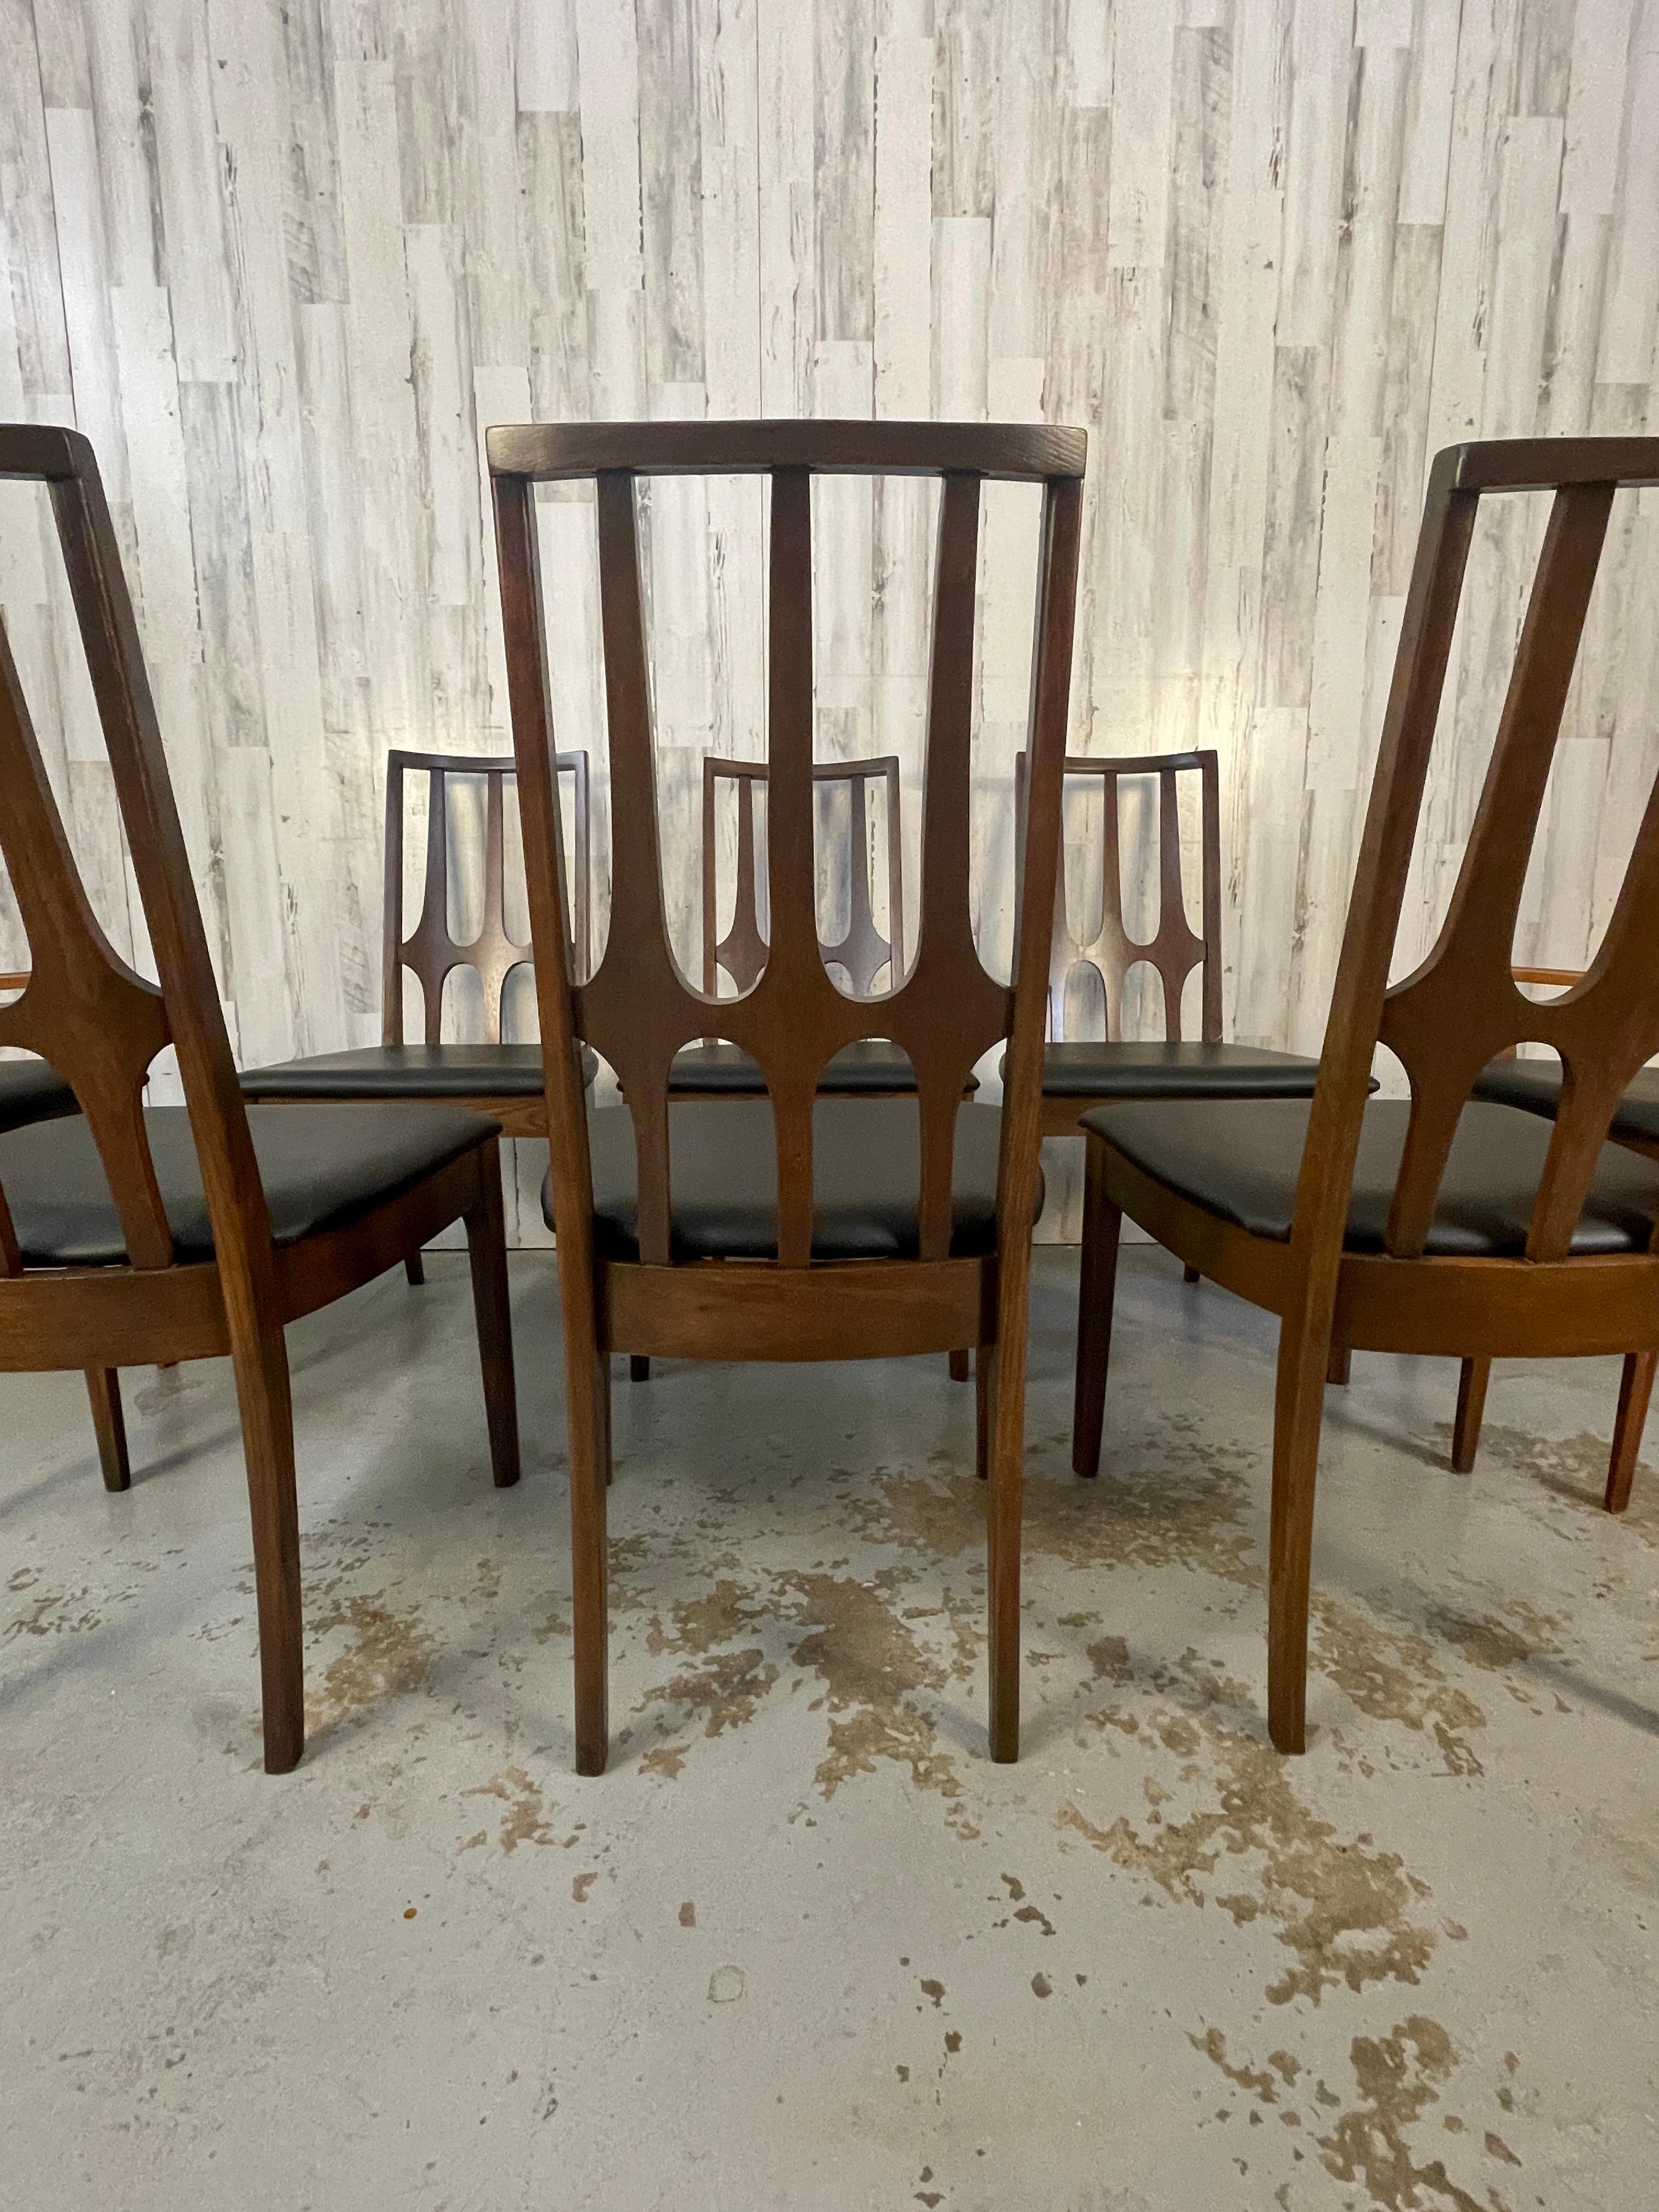 Broyhill Brasilia Dining Chairs, Set of 8 In Good Condition For Sale In Denton, TX